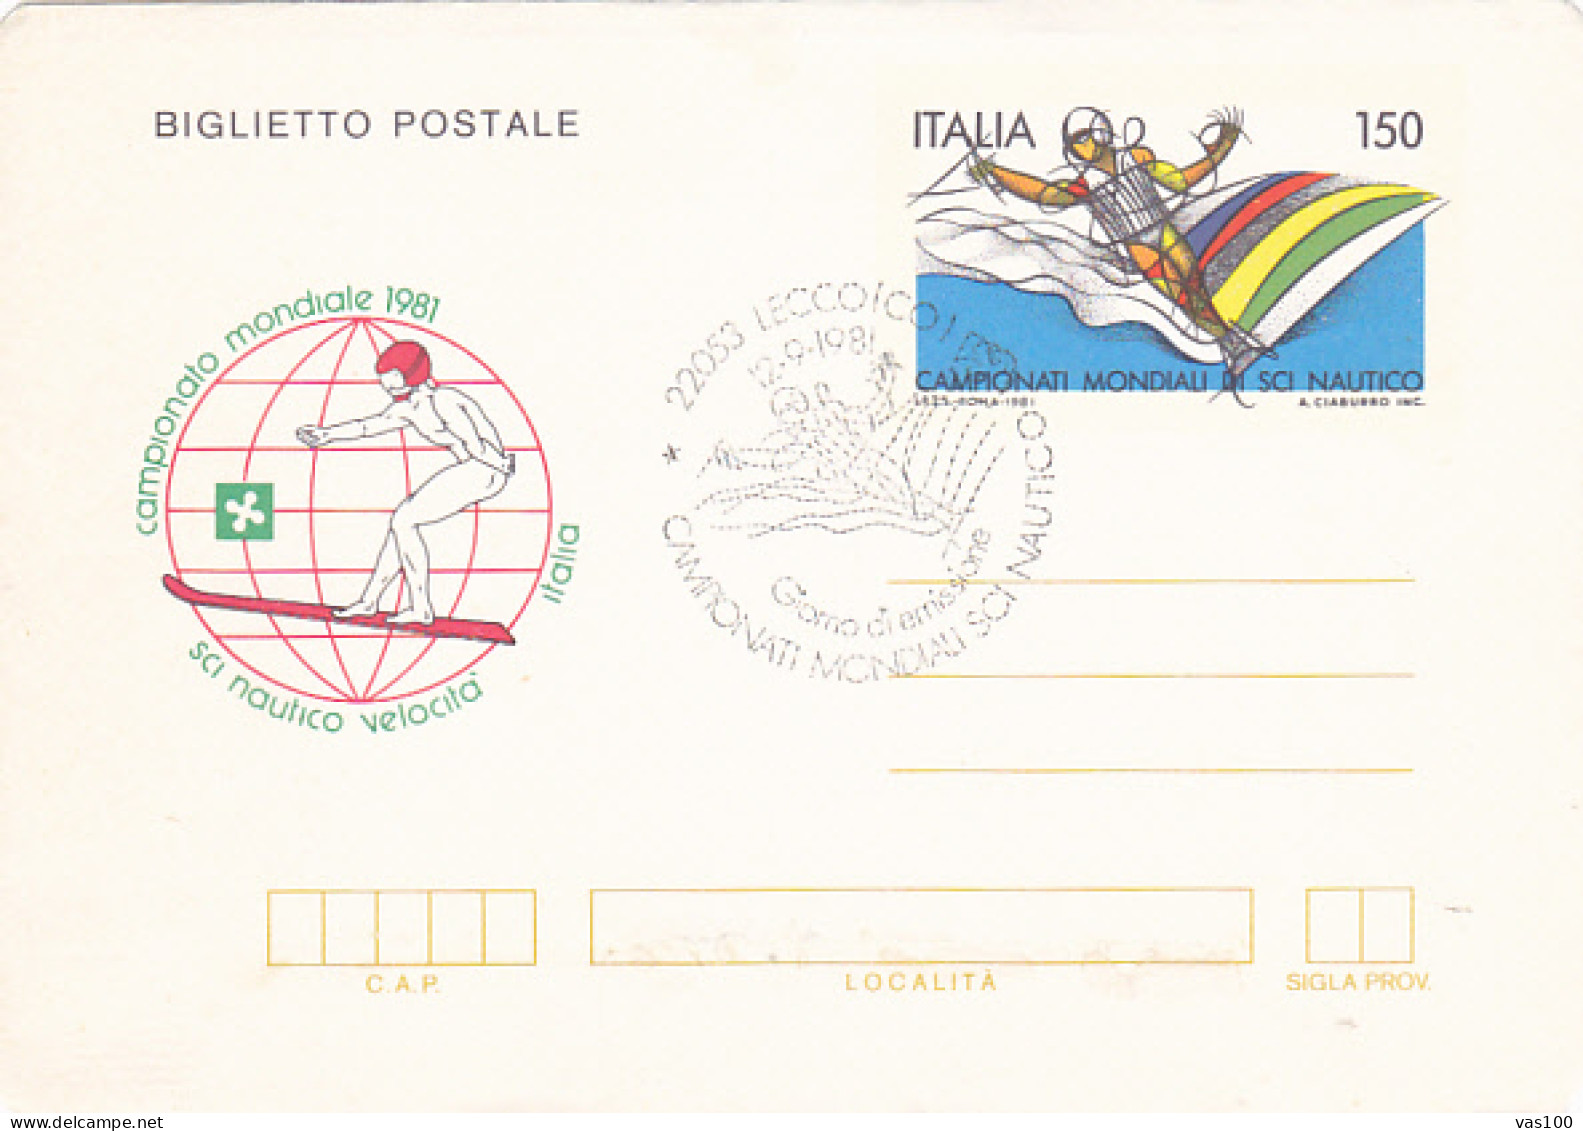 SPORTS, WATER SKIING, WORLD CHAMPIONSHIP, LETTERCARD STATIONERY, ENTIER POSTAL, OBKIT FDC, 1981, ITALY - Wasserski